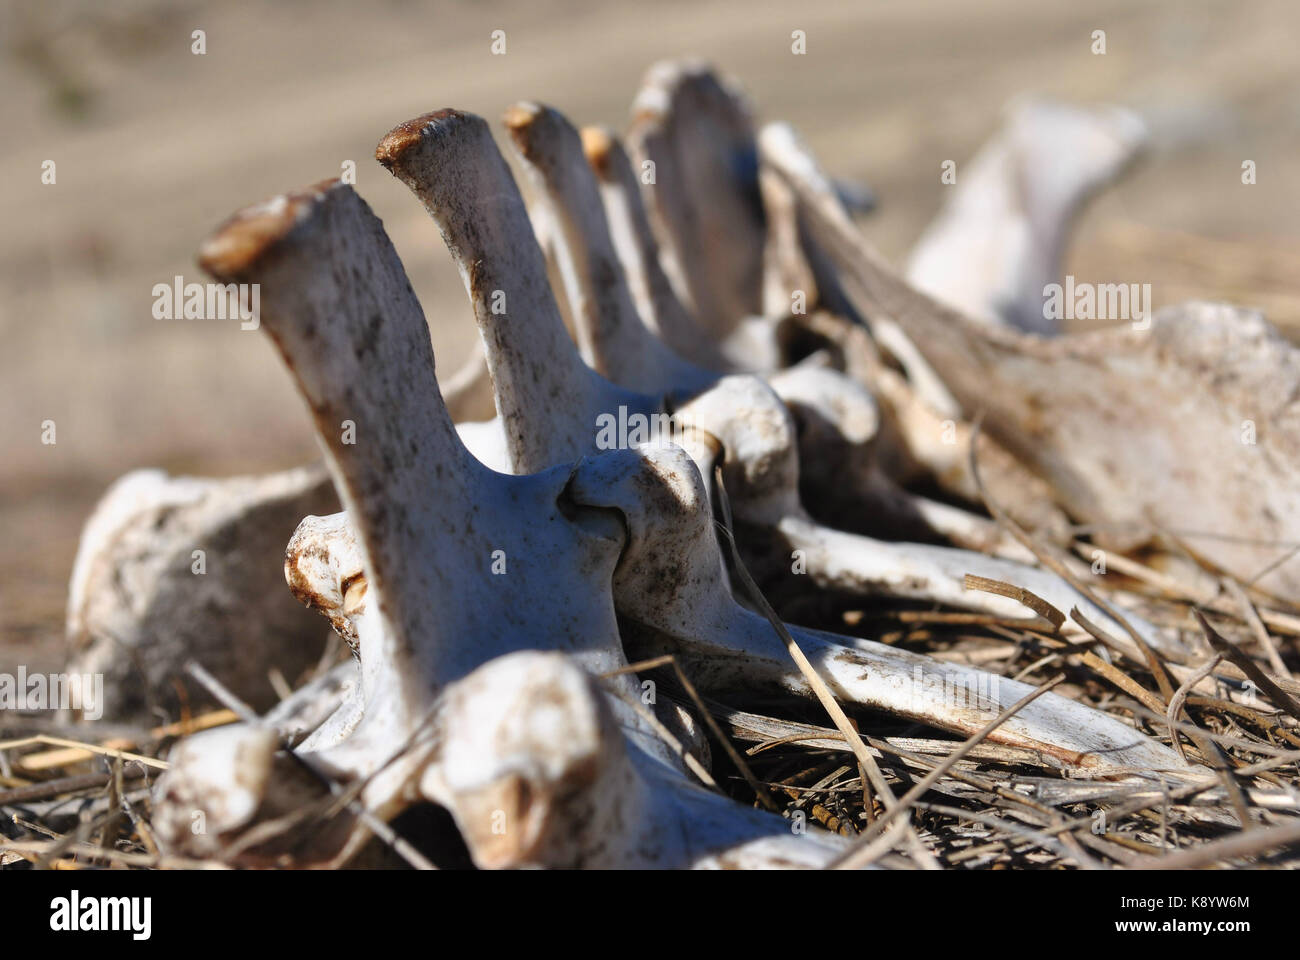 Spine found in farmers field in whitehall mt Stock Photo